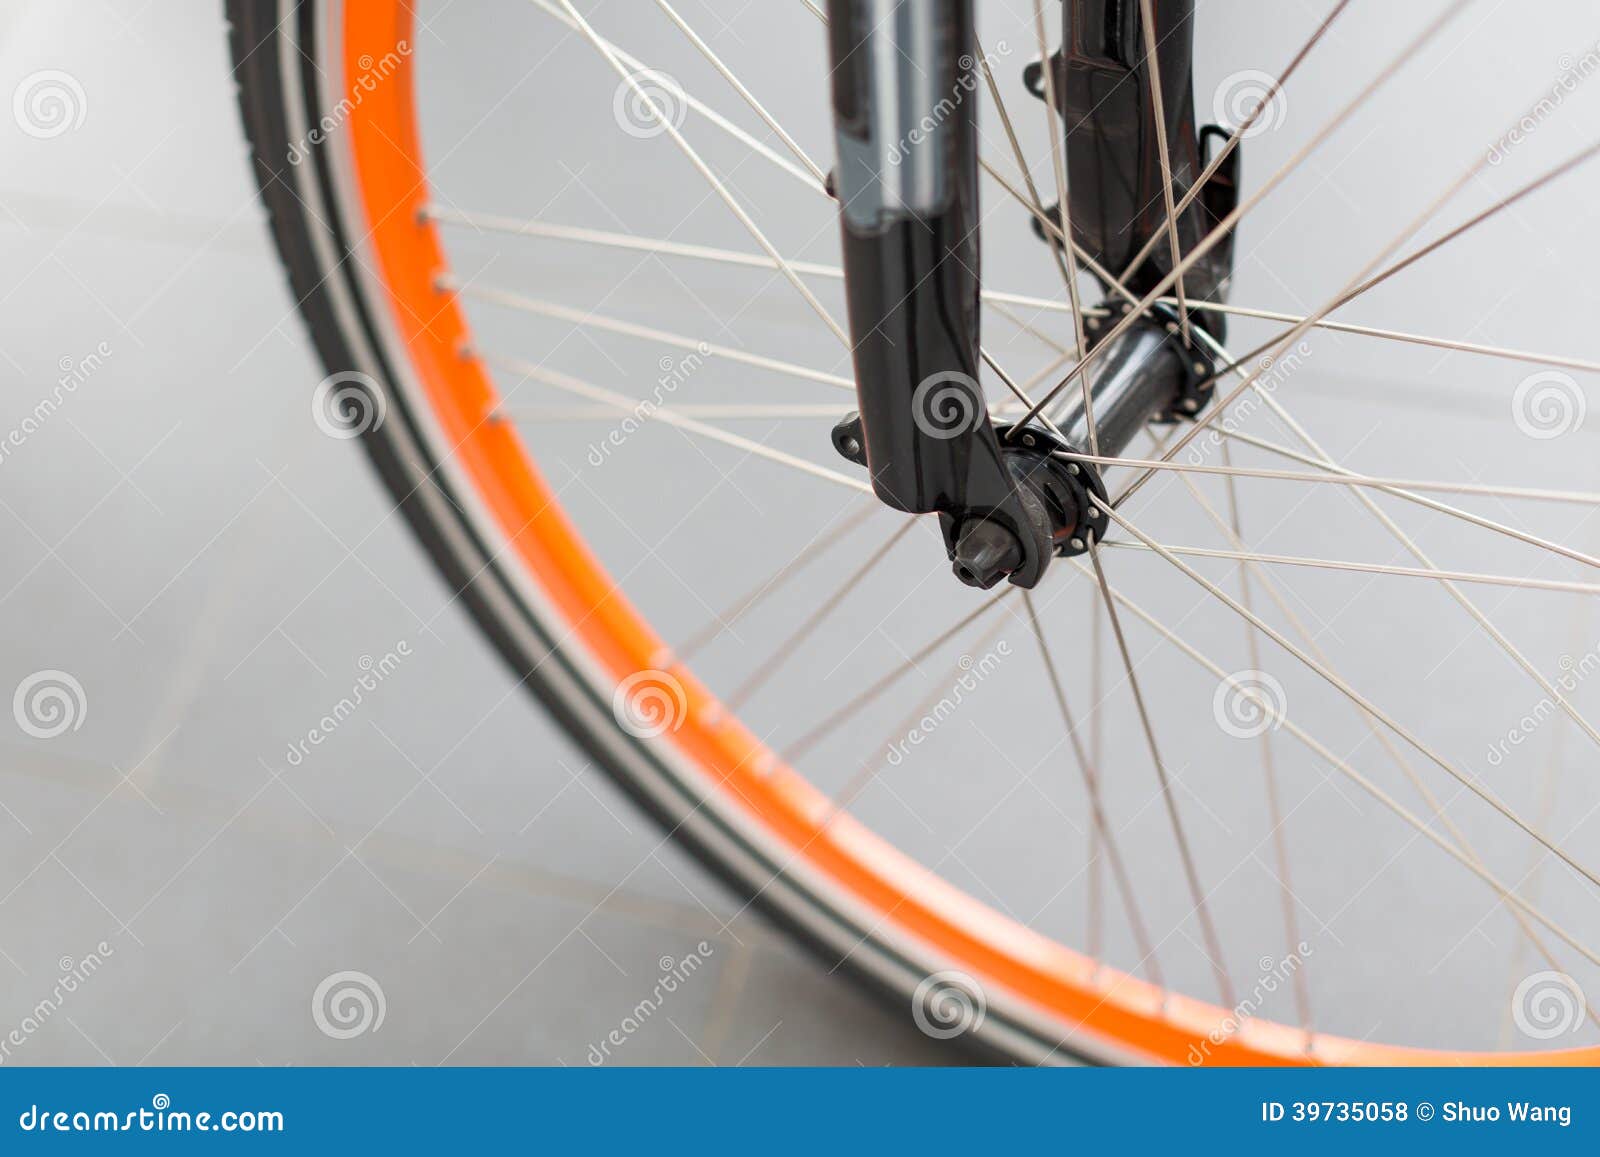 bicycle tire and spoke wheel